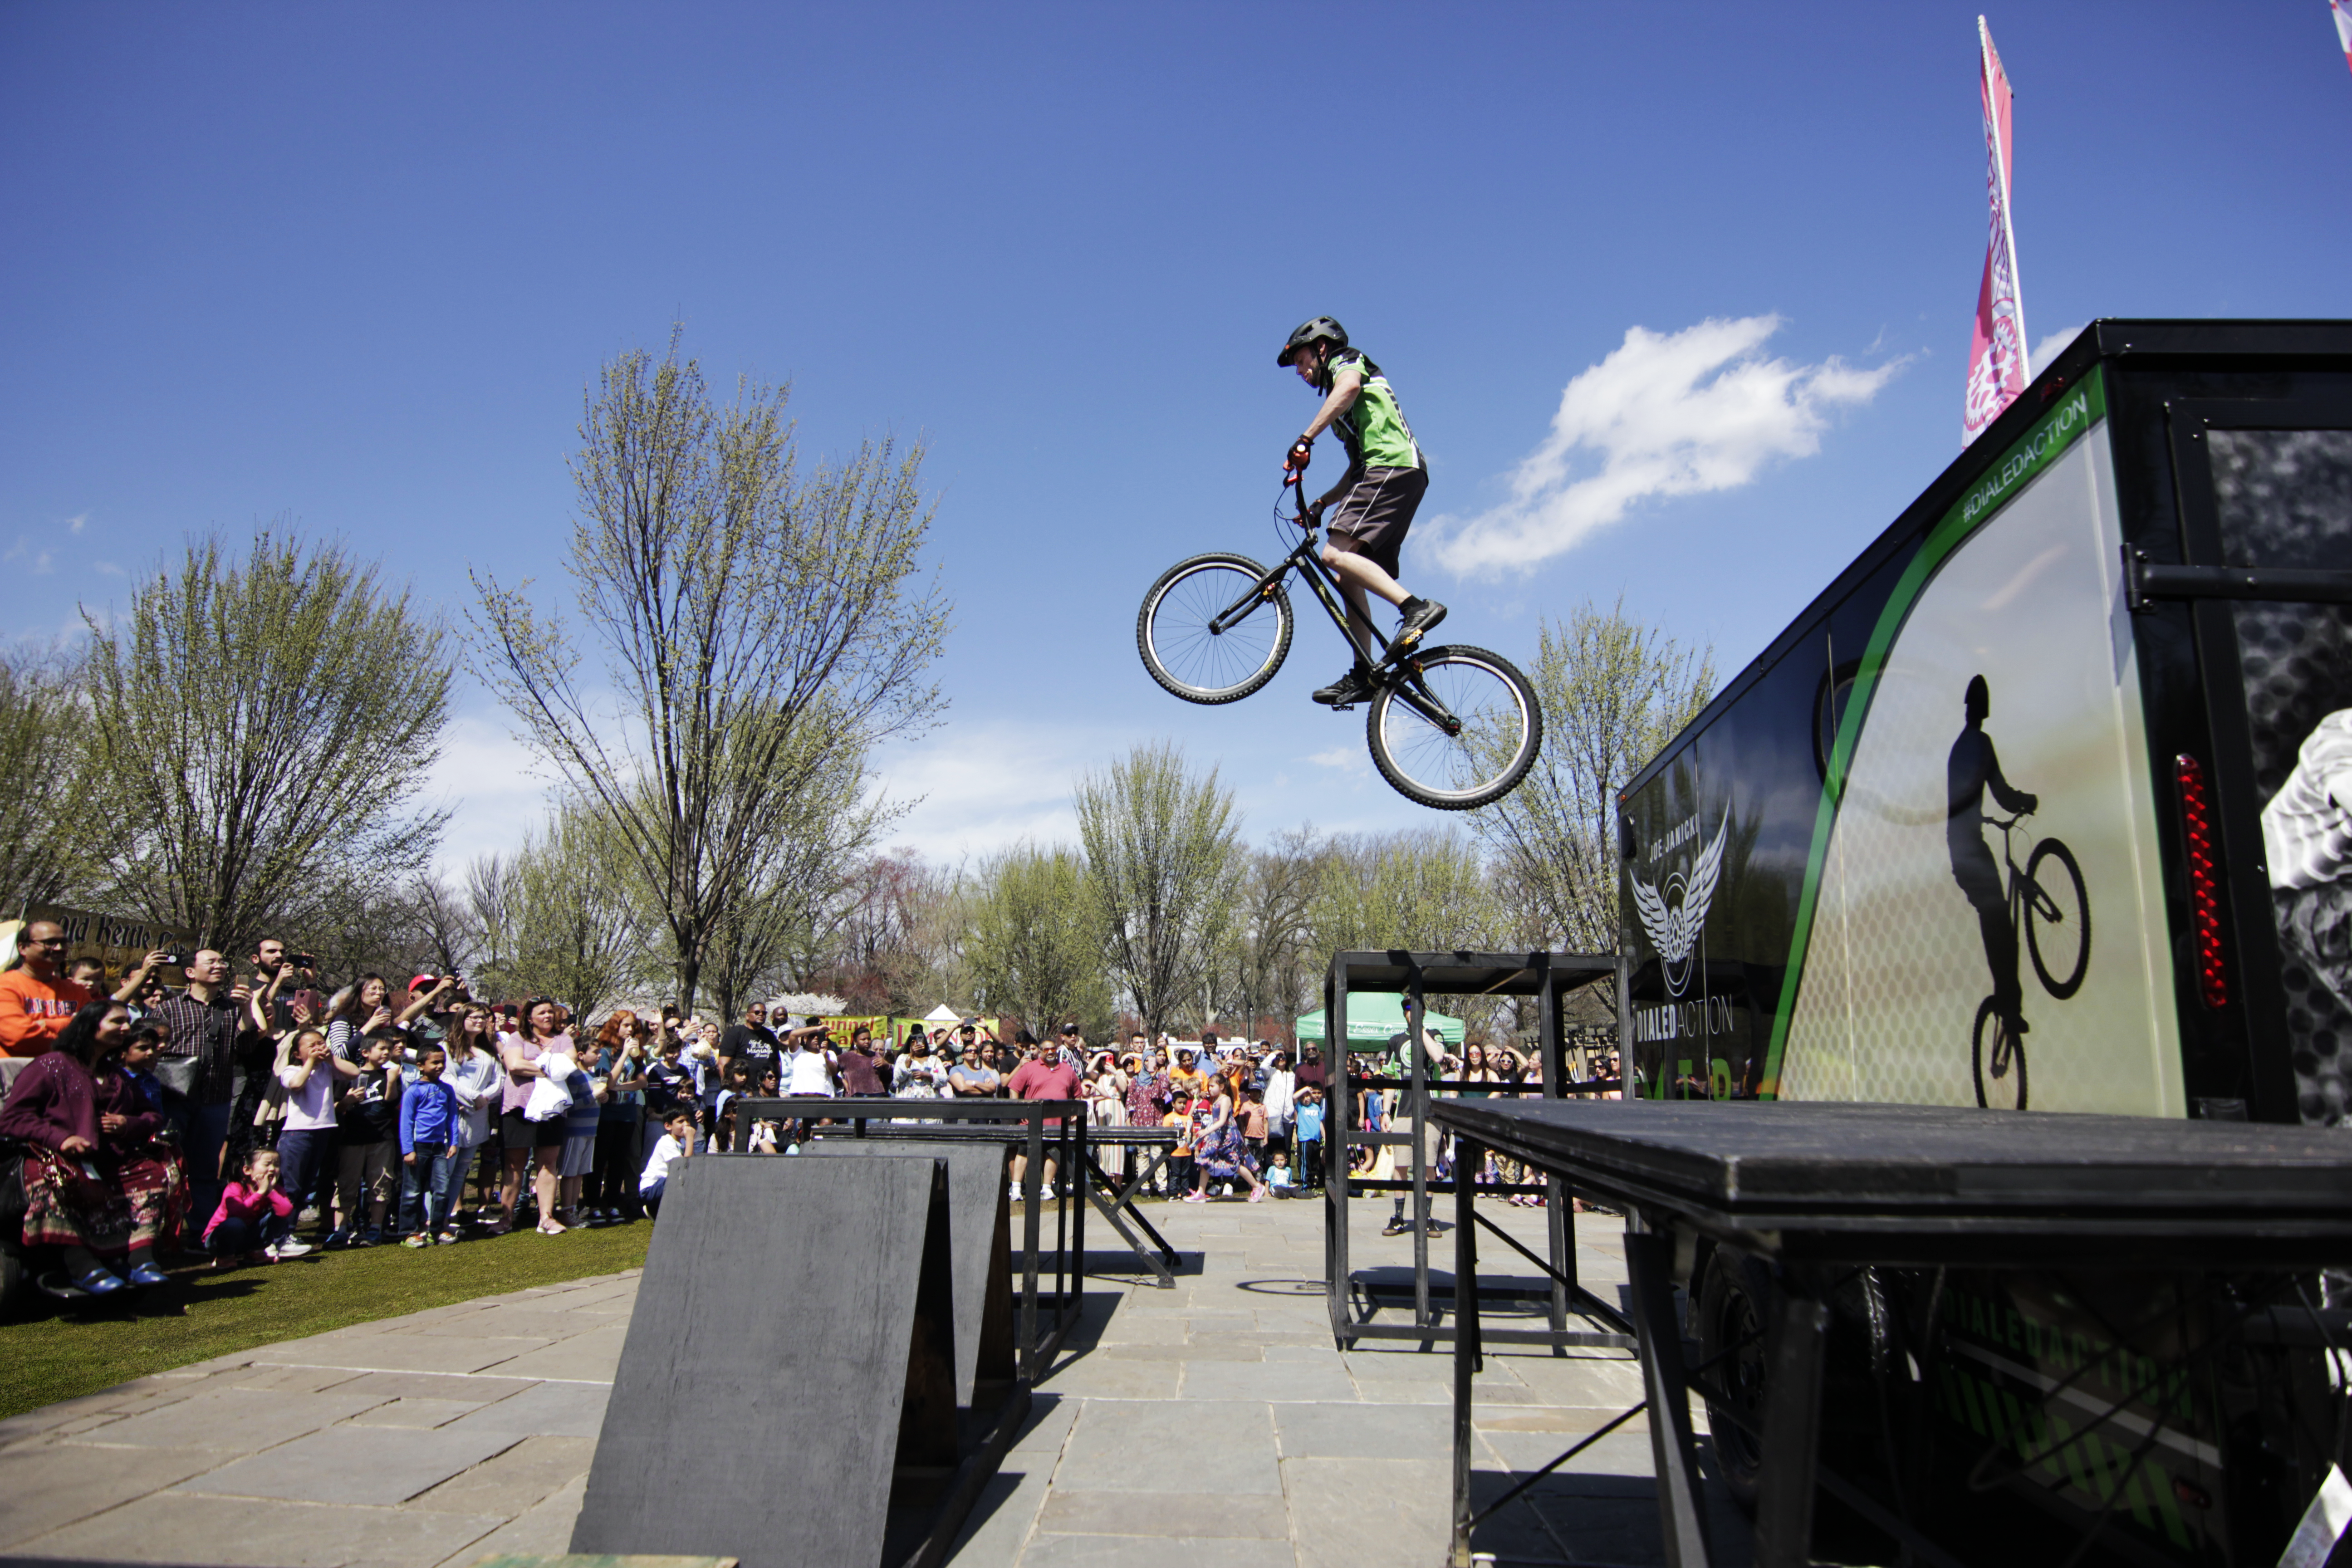 Dialed Action Mountain Bike Stunt Show